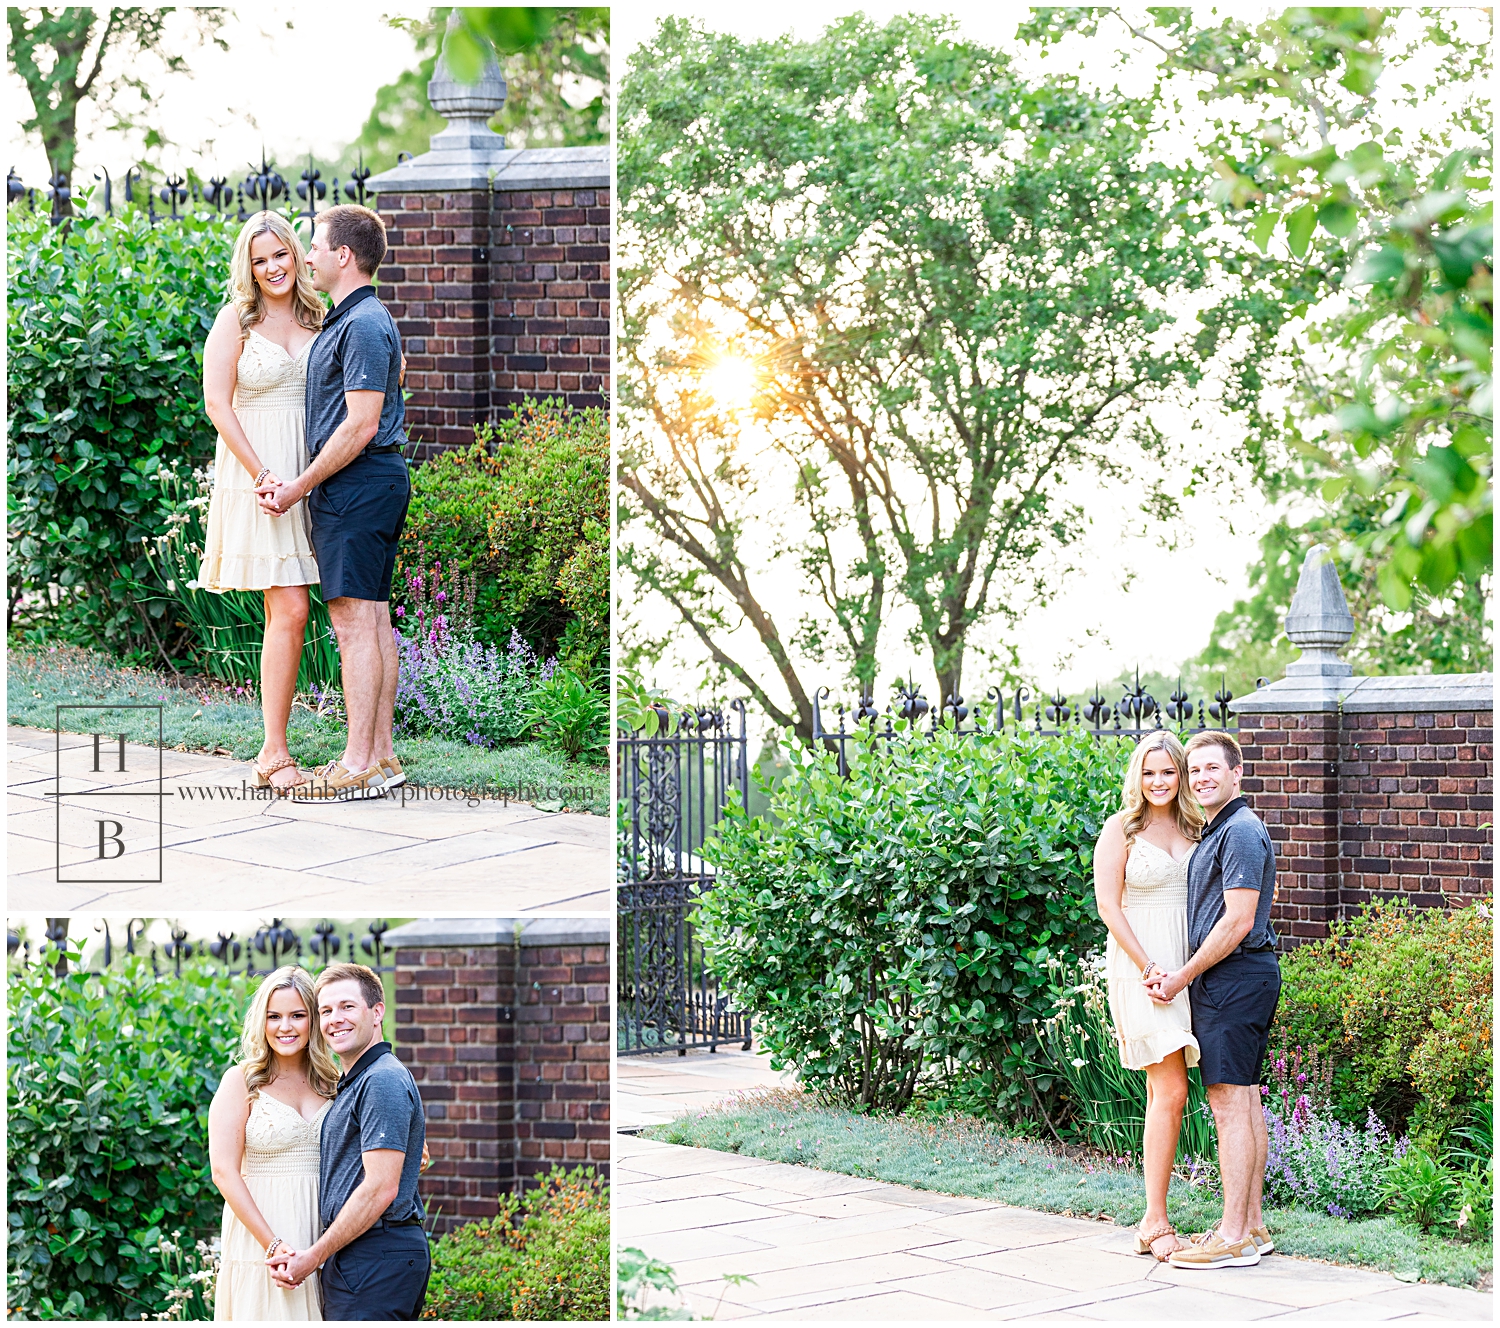 Couple stands and embraces one another during golden hour for engagement photos.